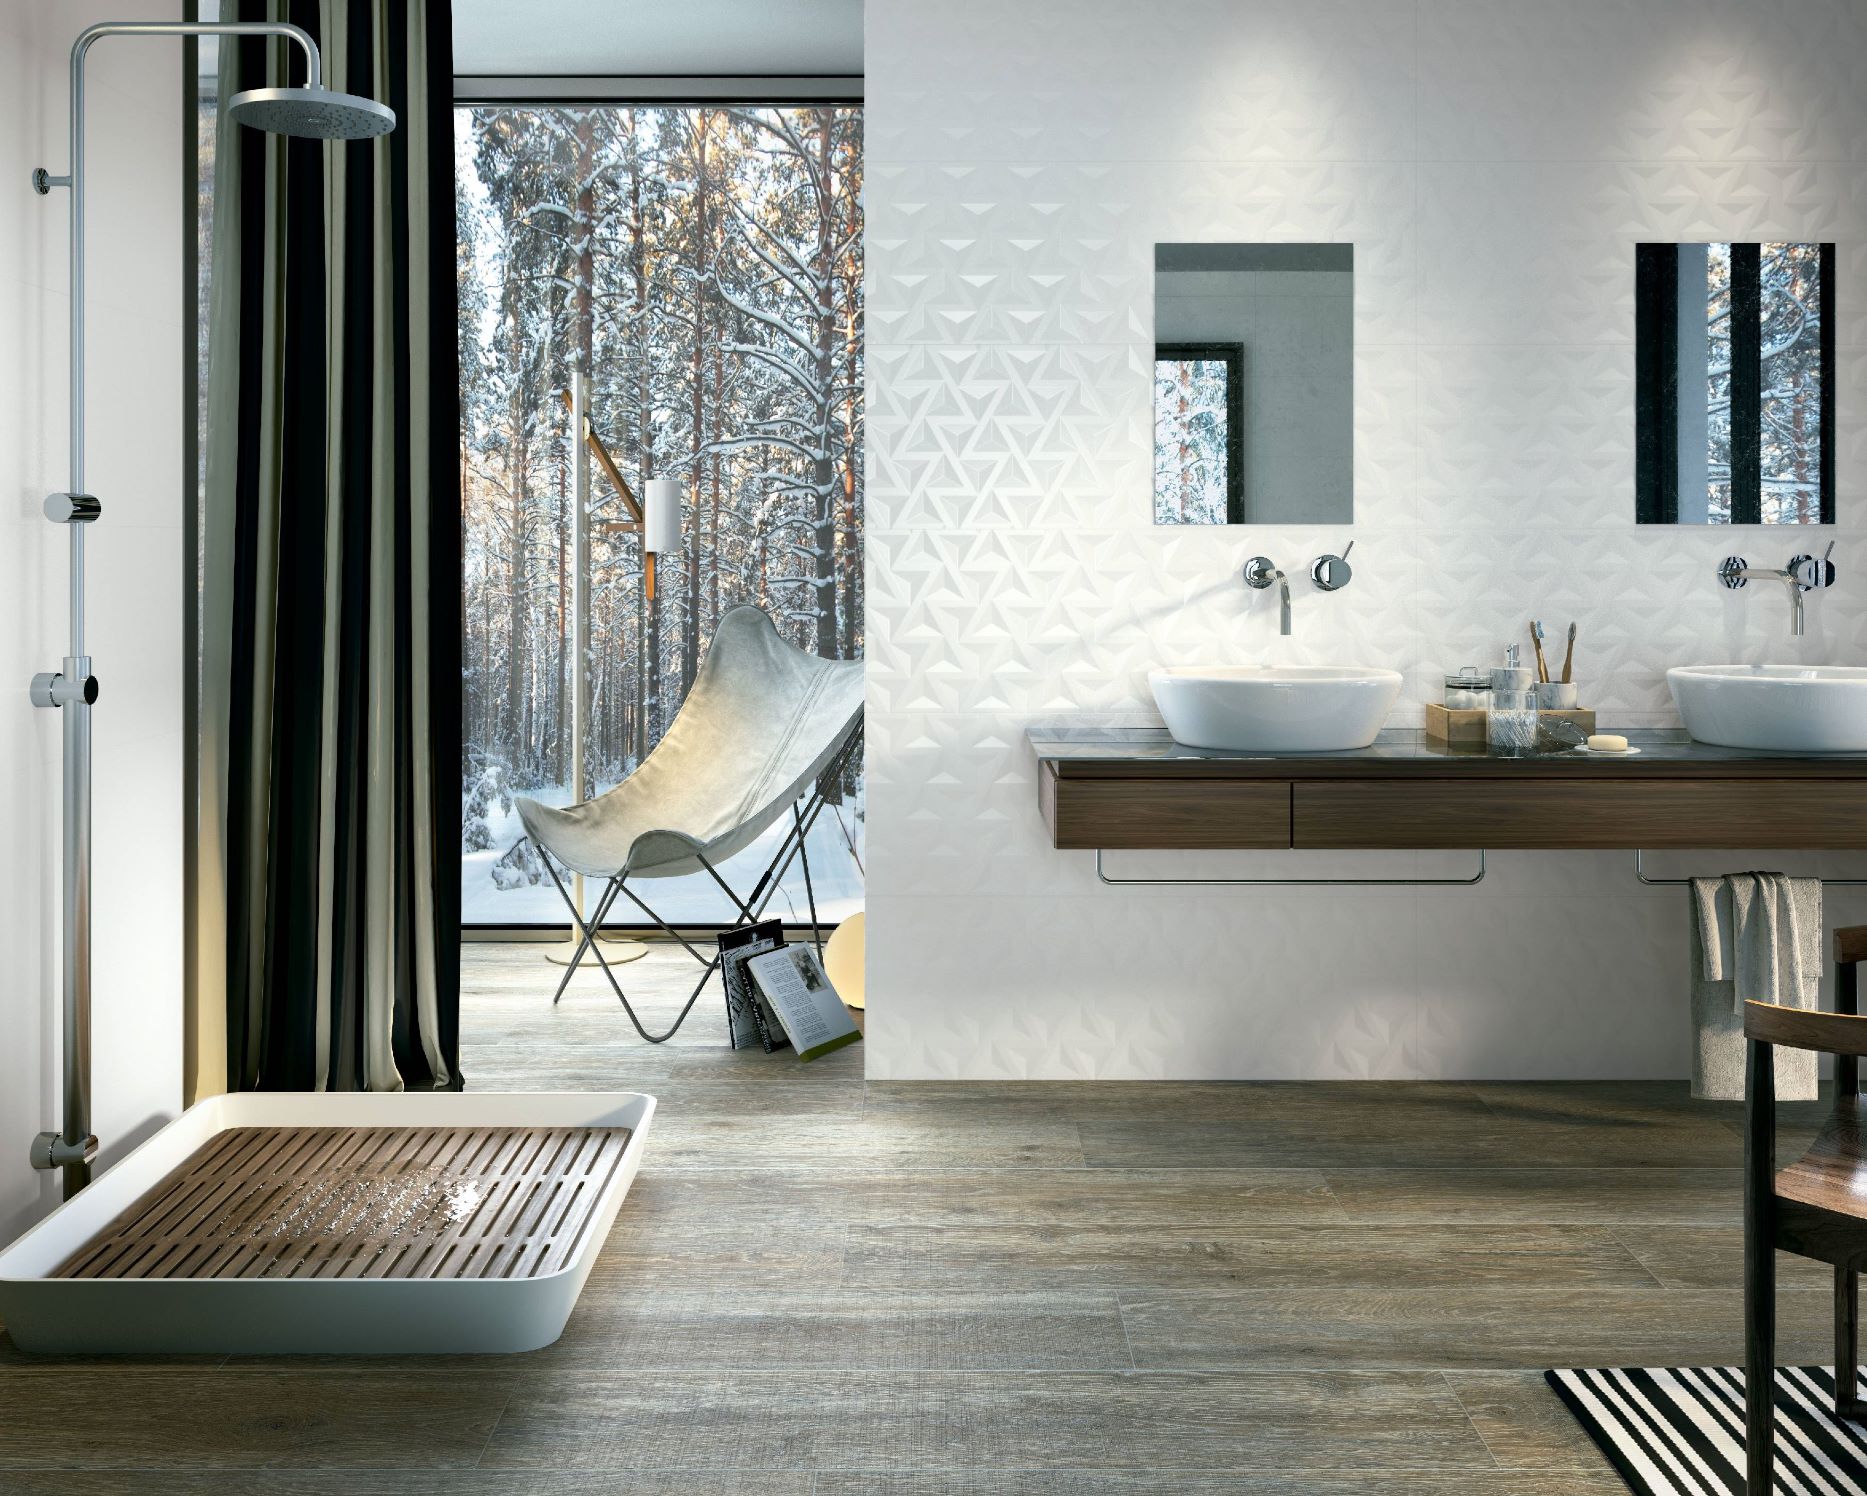 Artic_2_G | Stones & More | Finest selection of Mosaics, Glass, Tile and Stone